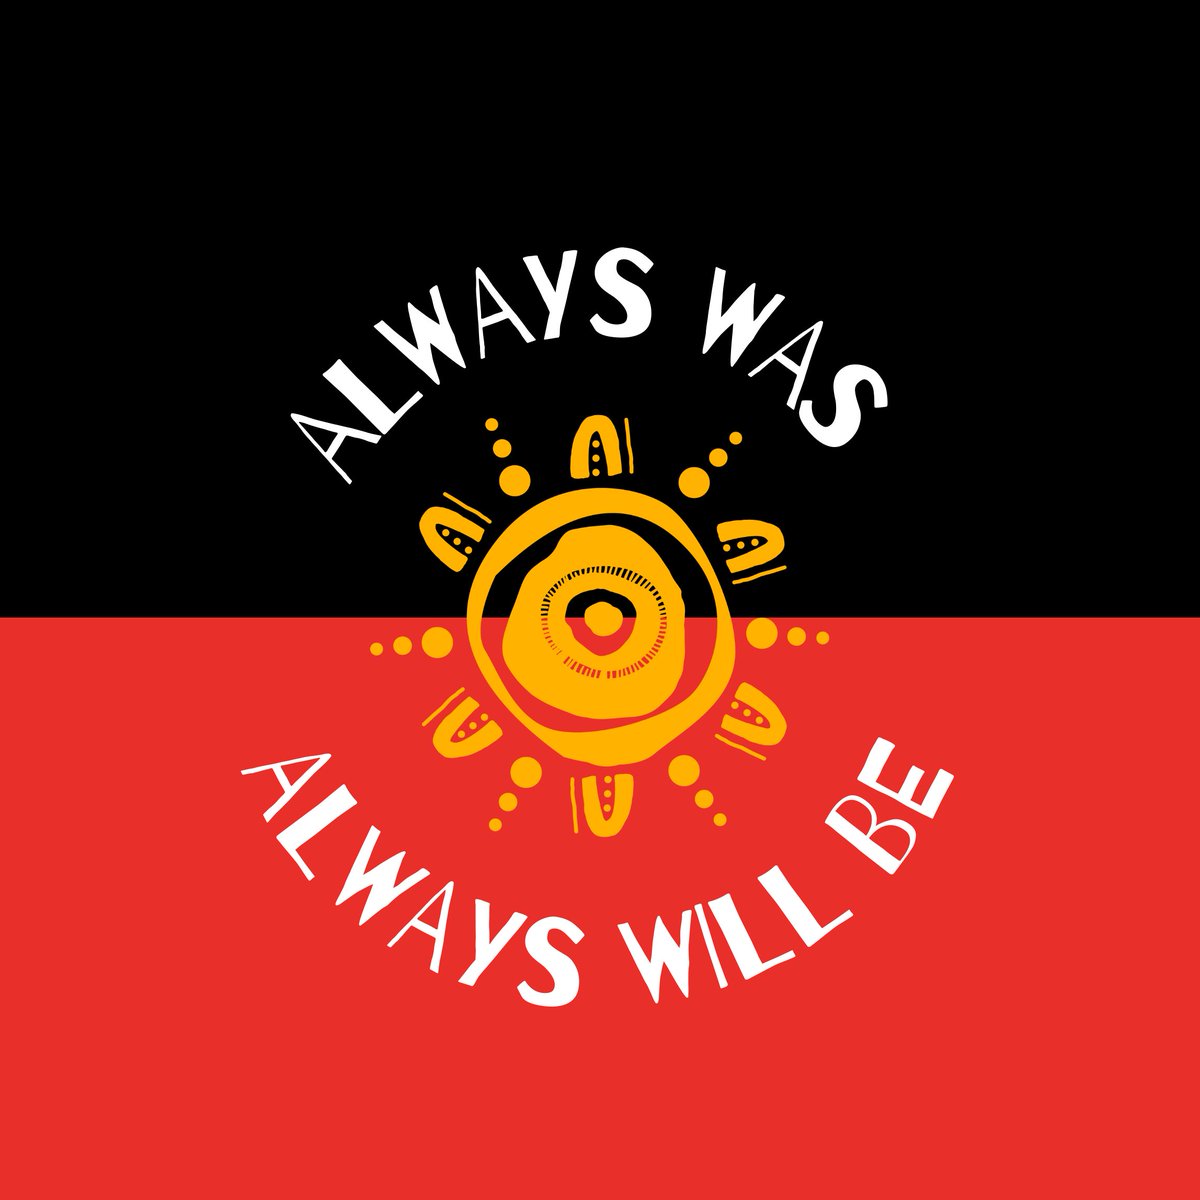 As we approach January 26, we respect and reflect on Aboriginal & Torres Strait Islander peoples’ ongoing strength & resilience. We understand there may be an increased risk of distress as we encourage all to seek support if needed and to embrace cultural healing practices.